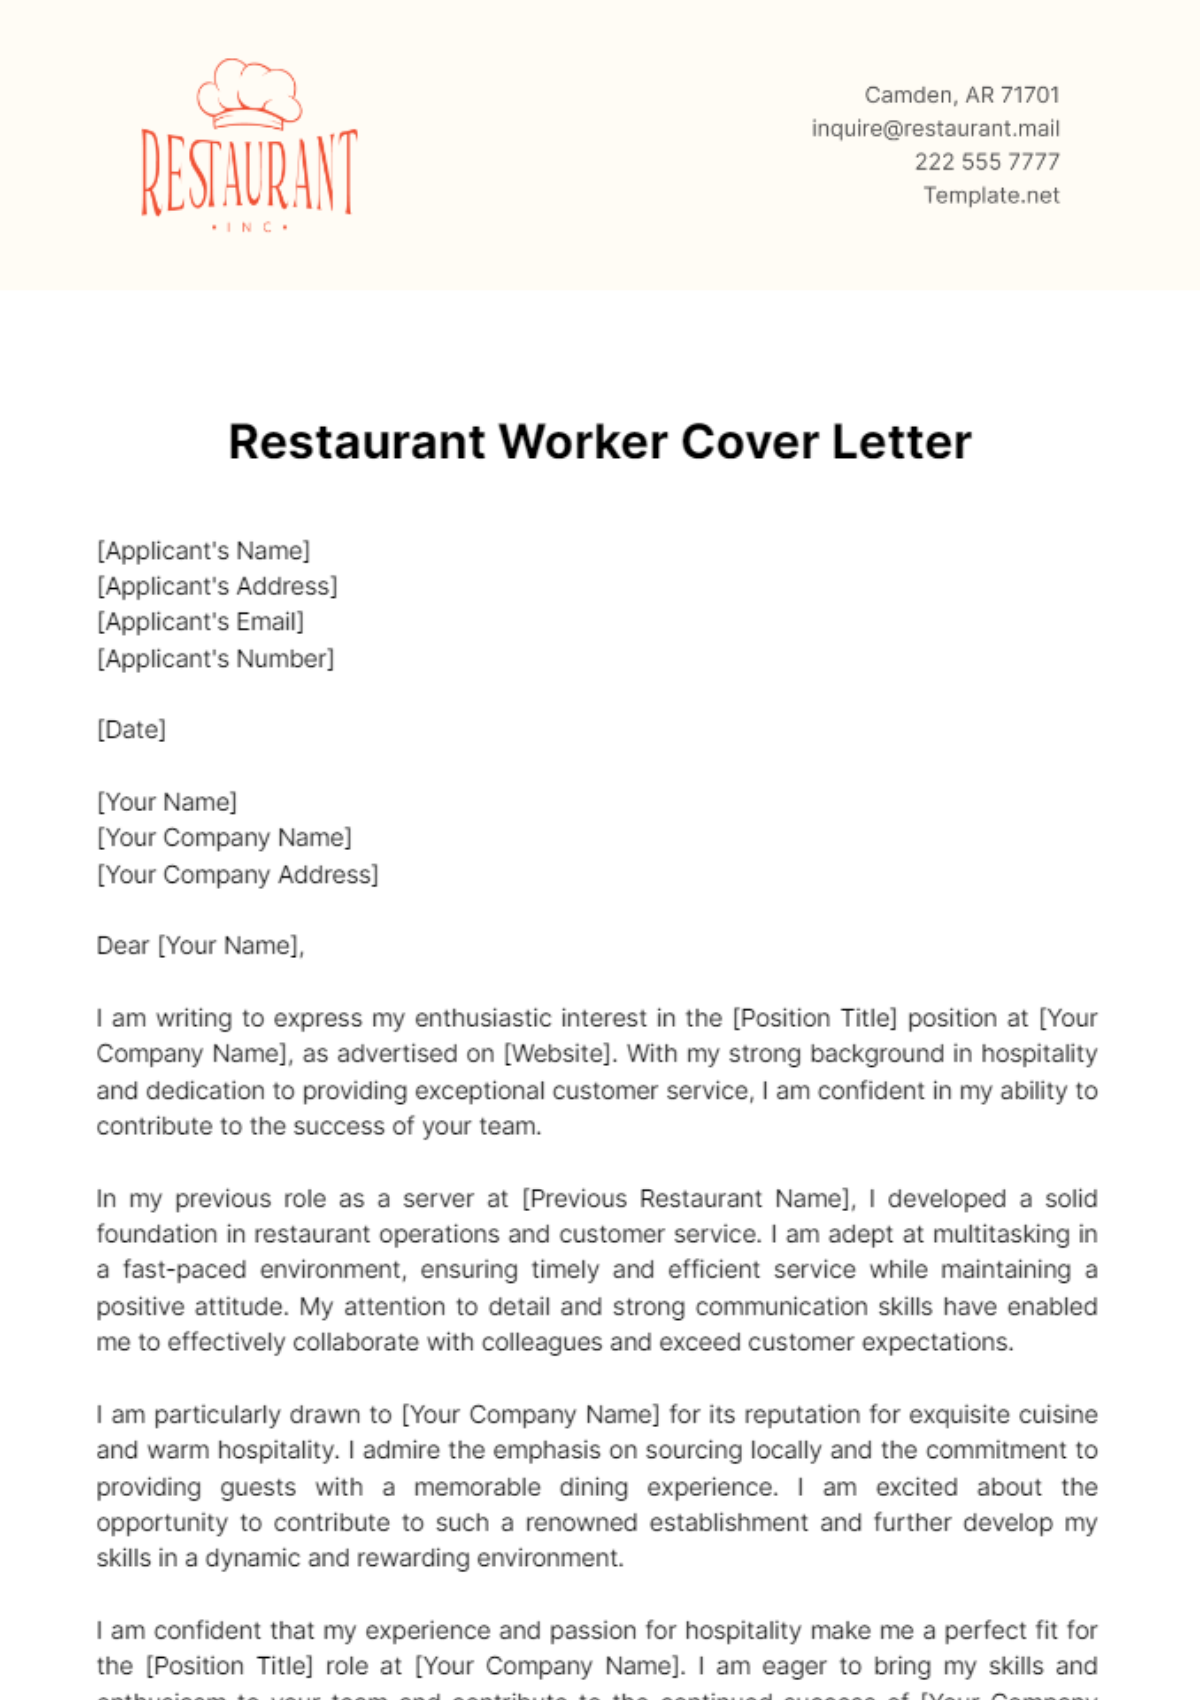 Free Restaurant Worker Cover Letter Template